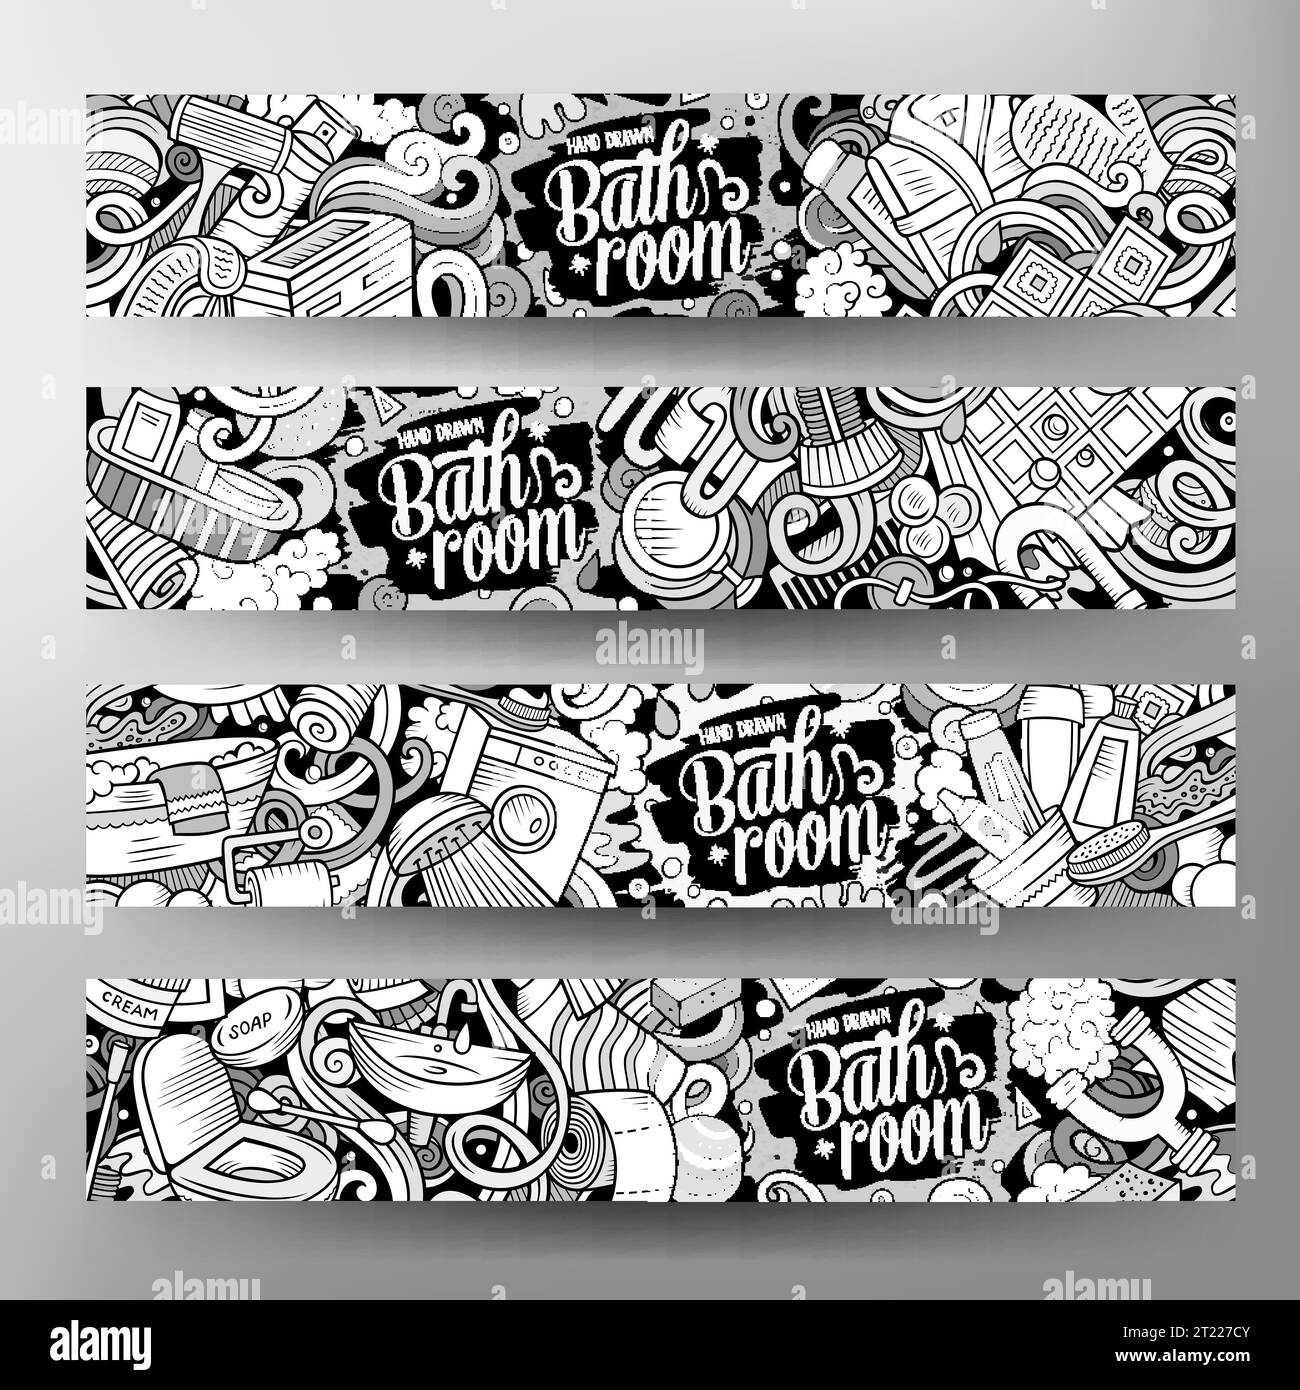 Bathroom doodle banners set. Cartoon detailed Bath identity with objects and symbols. Line art vector template illustration Stock Vector